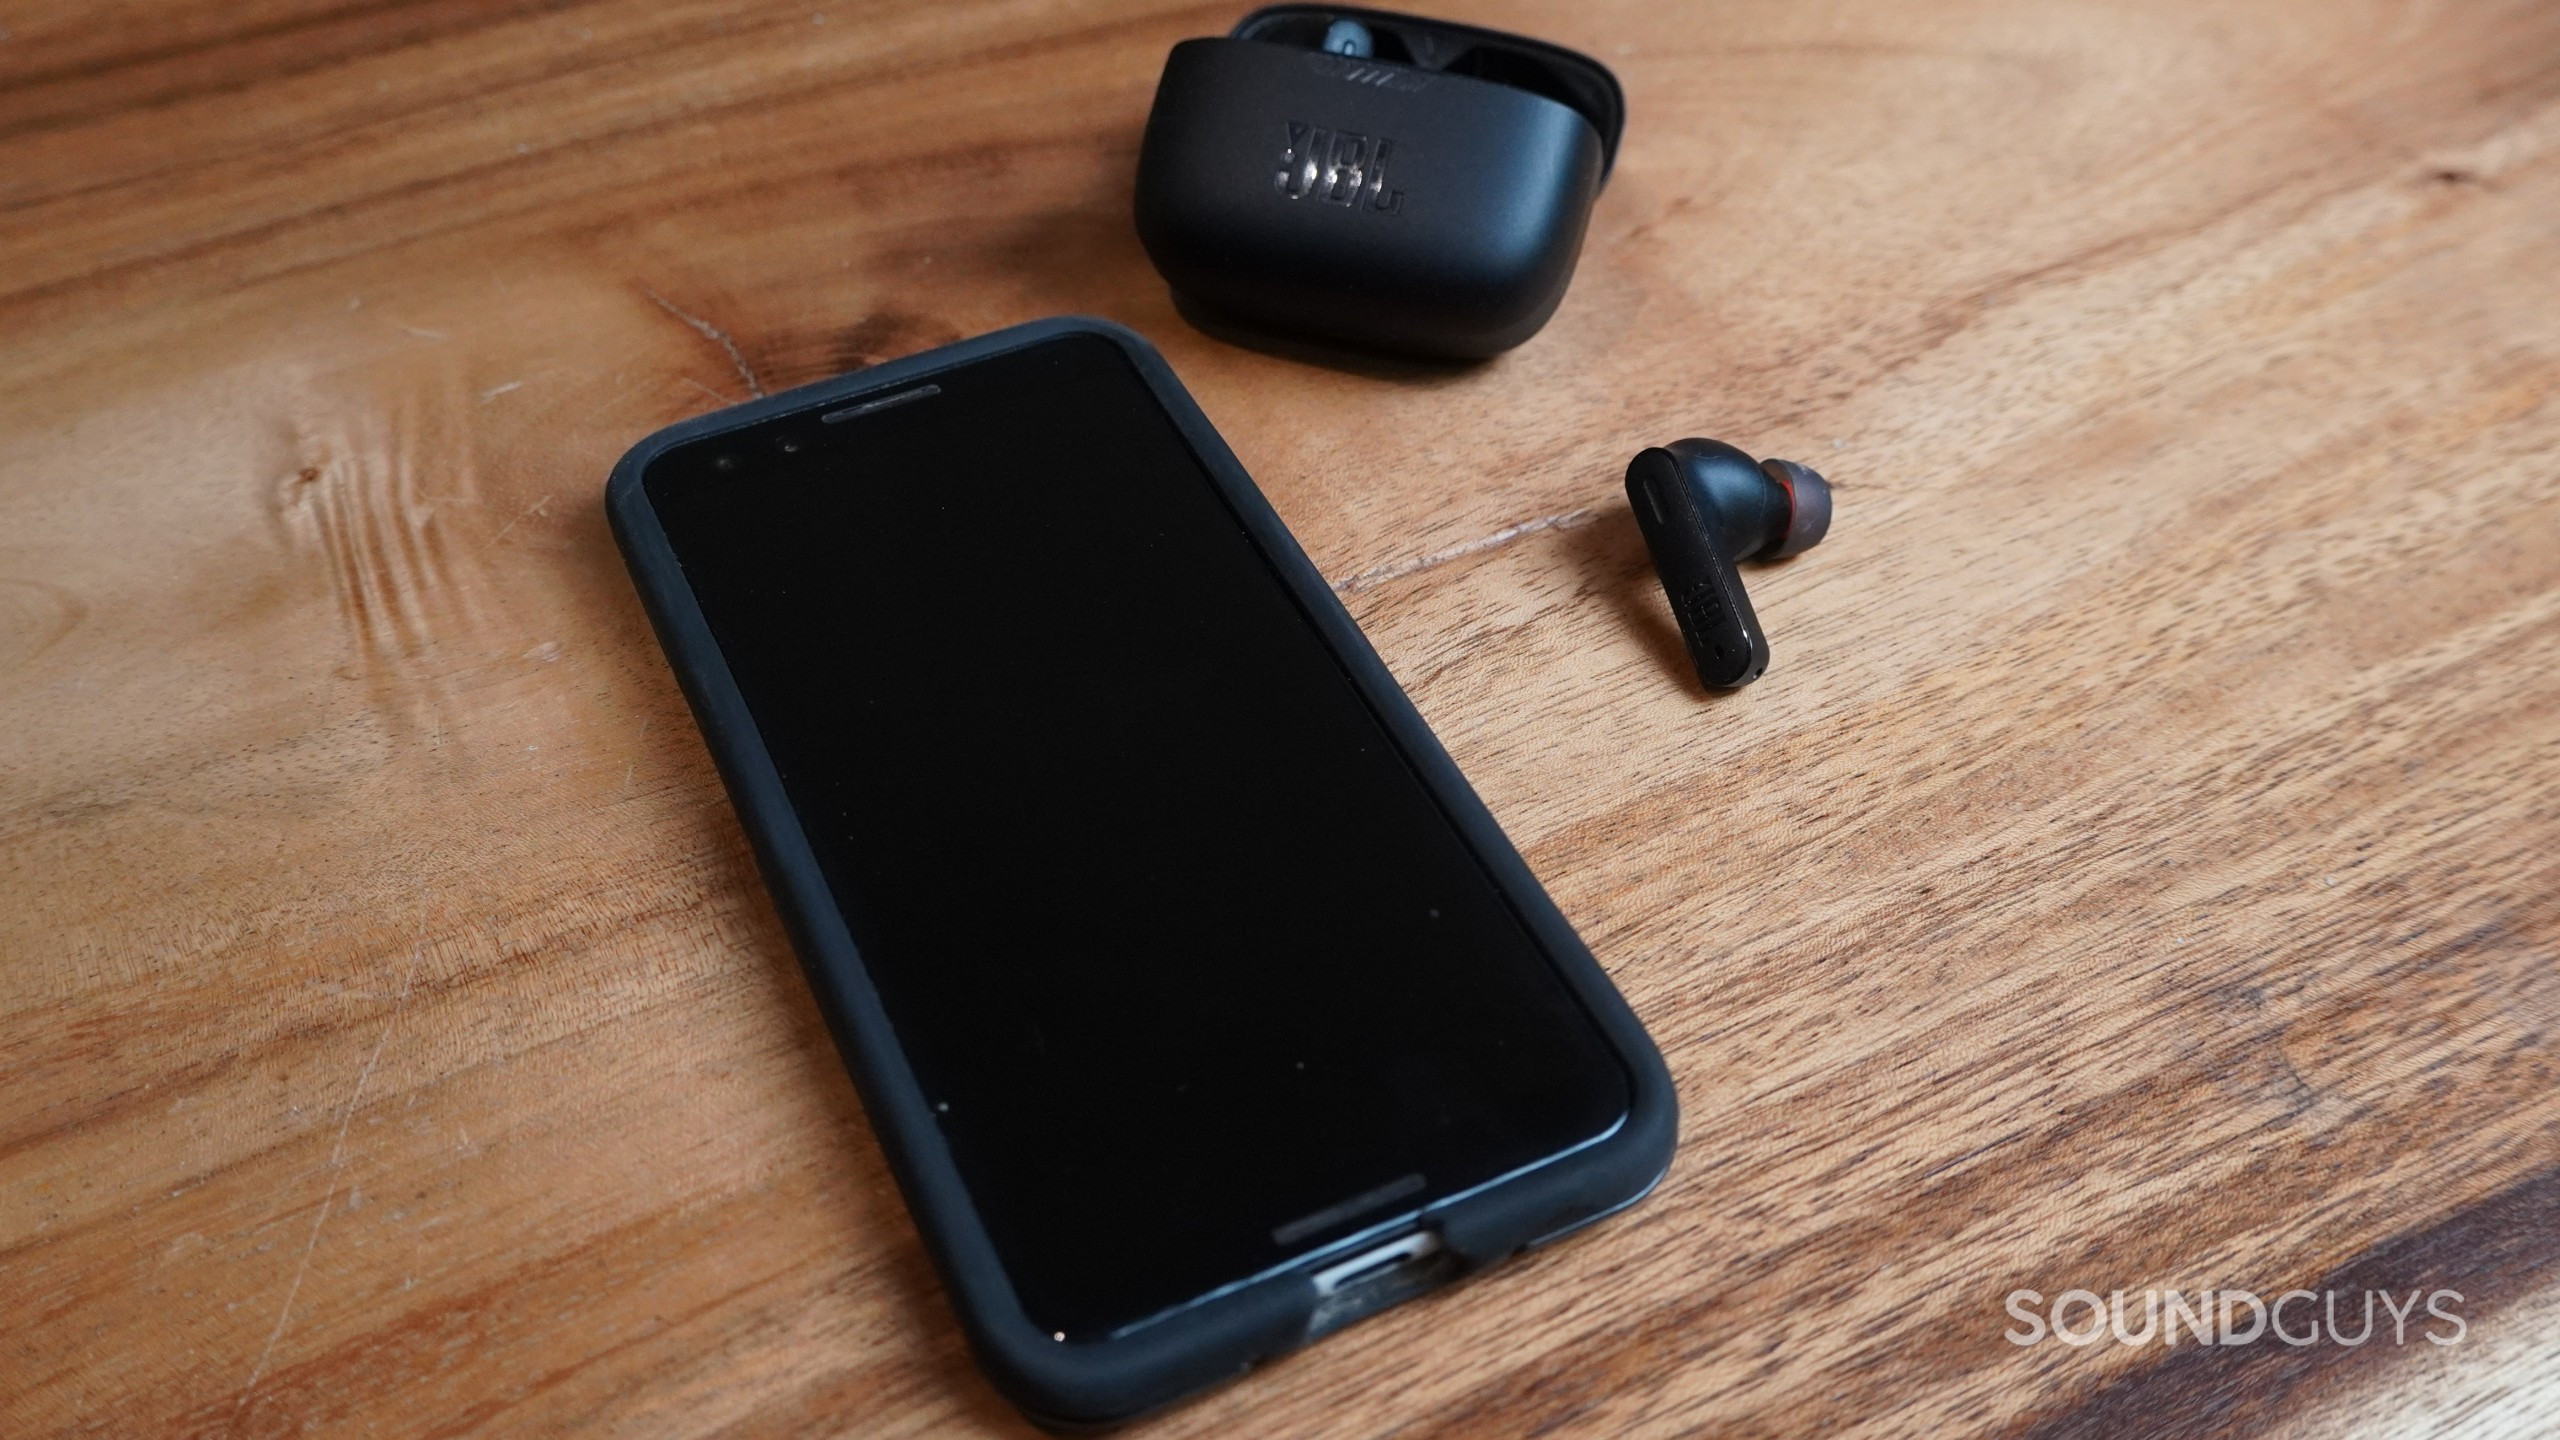 The JBL Tunes 230NC TWS earbuds shown next to a smartphone and the charging case on a wooden table.